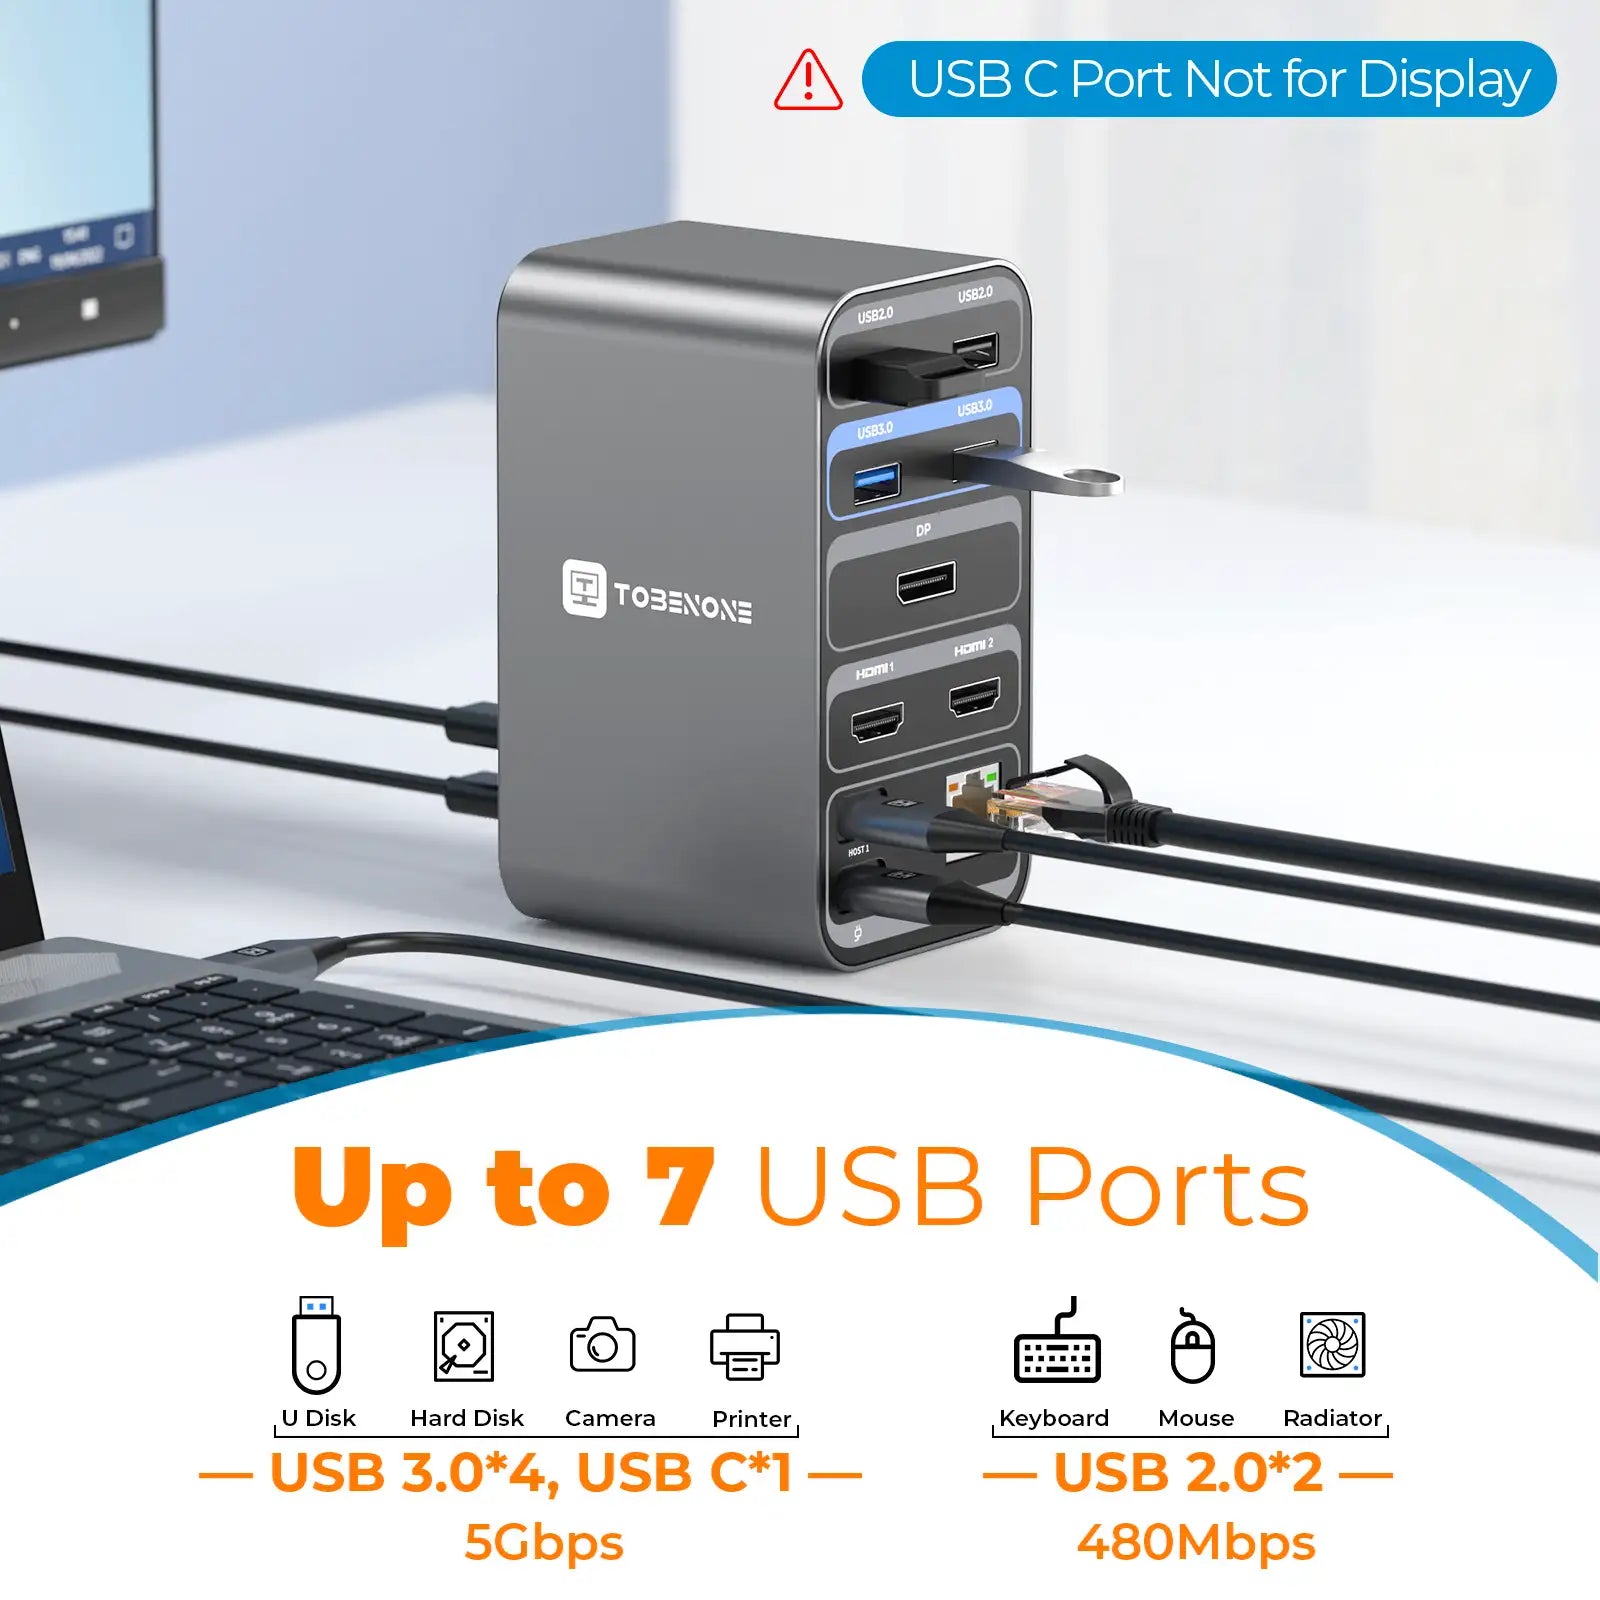 UDS18 Docking Station Connect More External USB Devices Up To 7 USB Ports